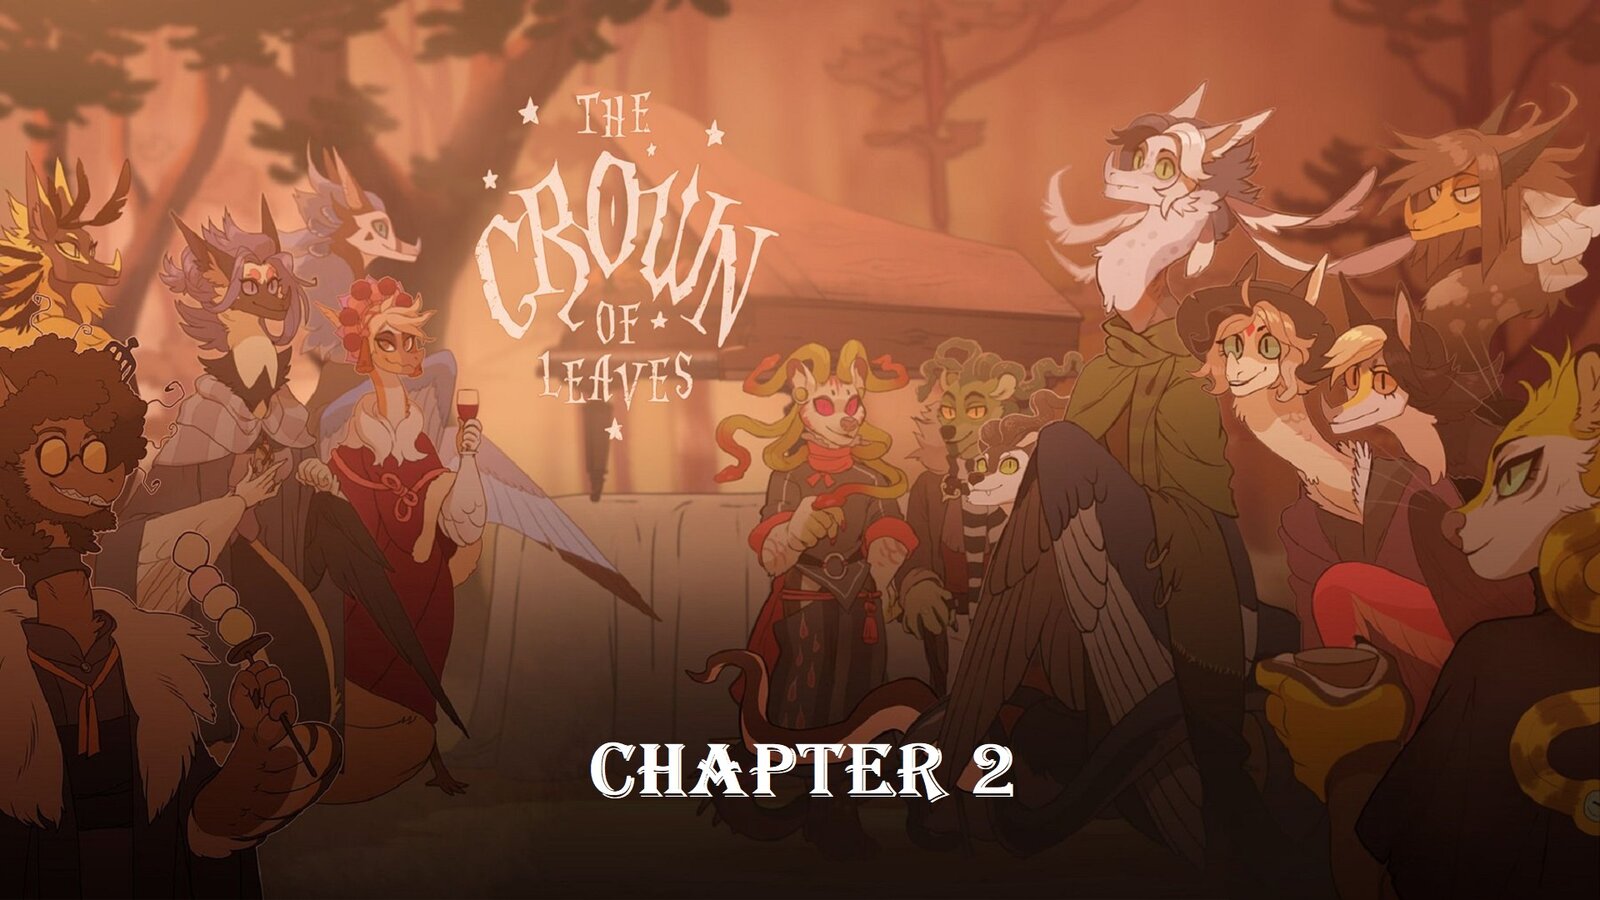 The Crown of Leaves: Chapter 2